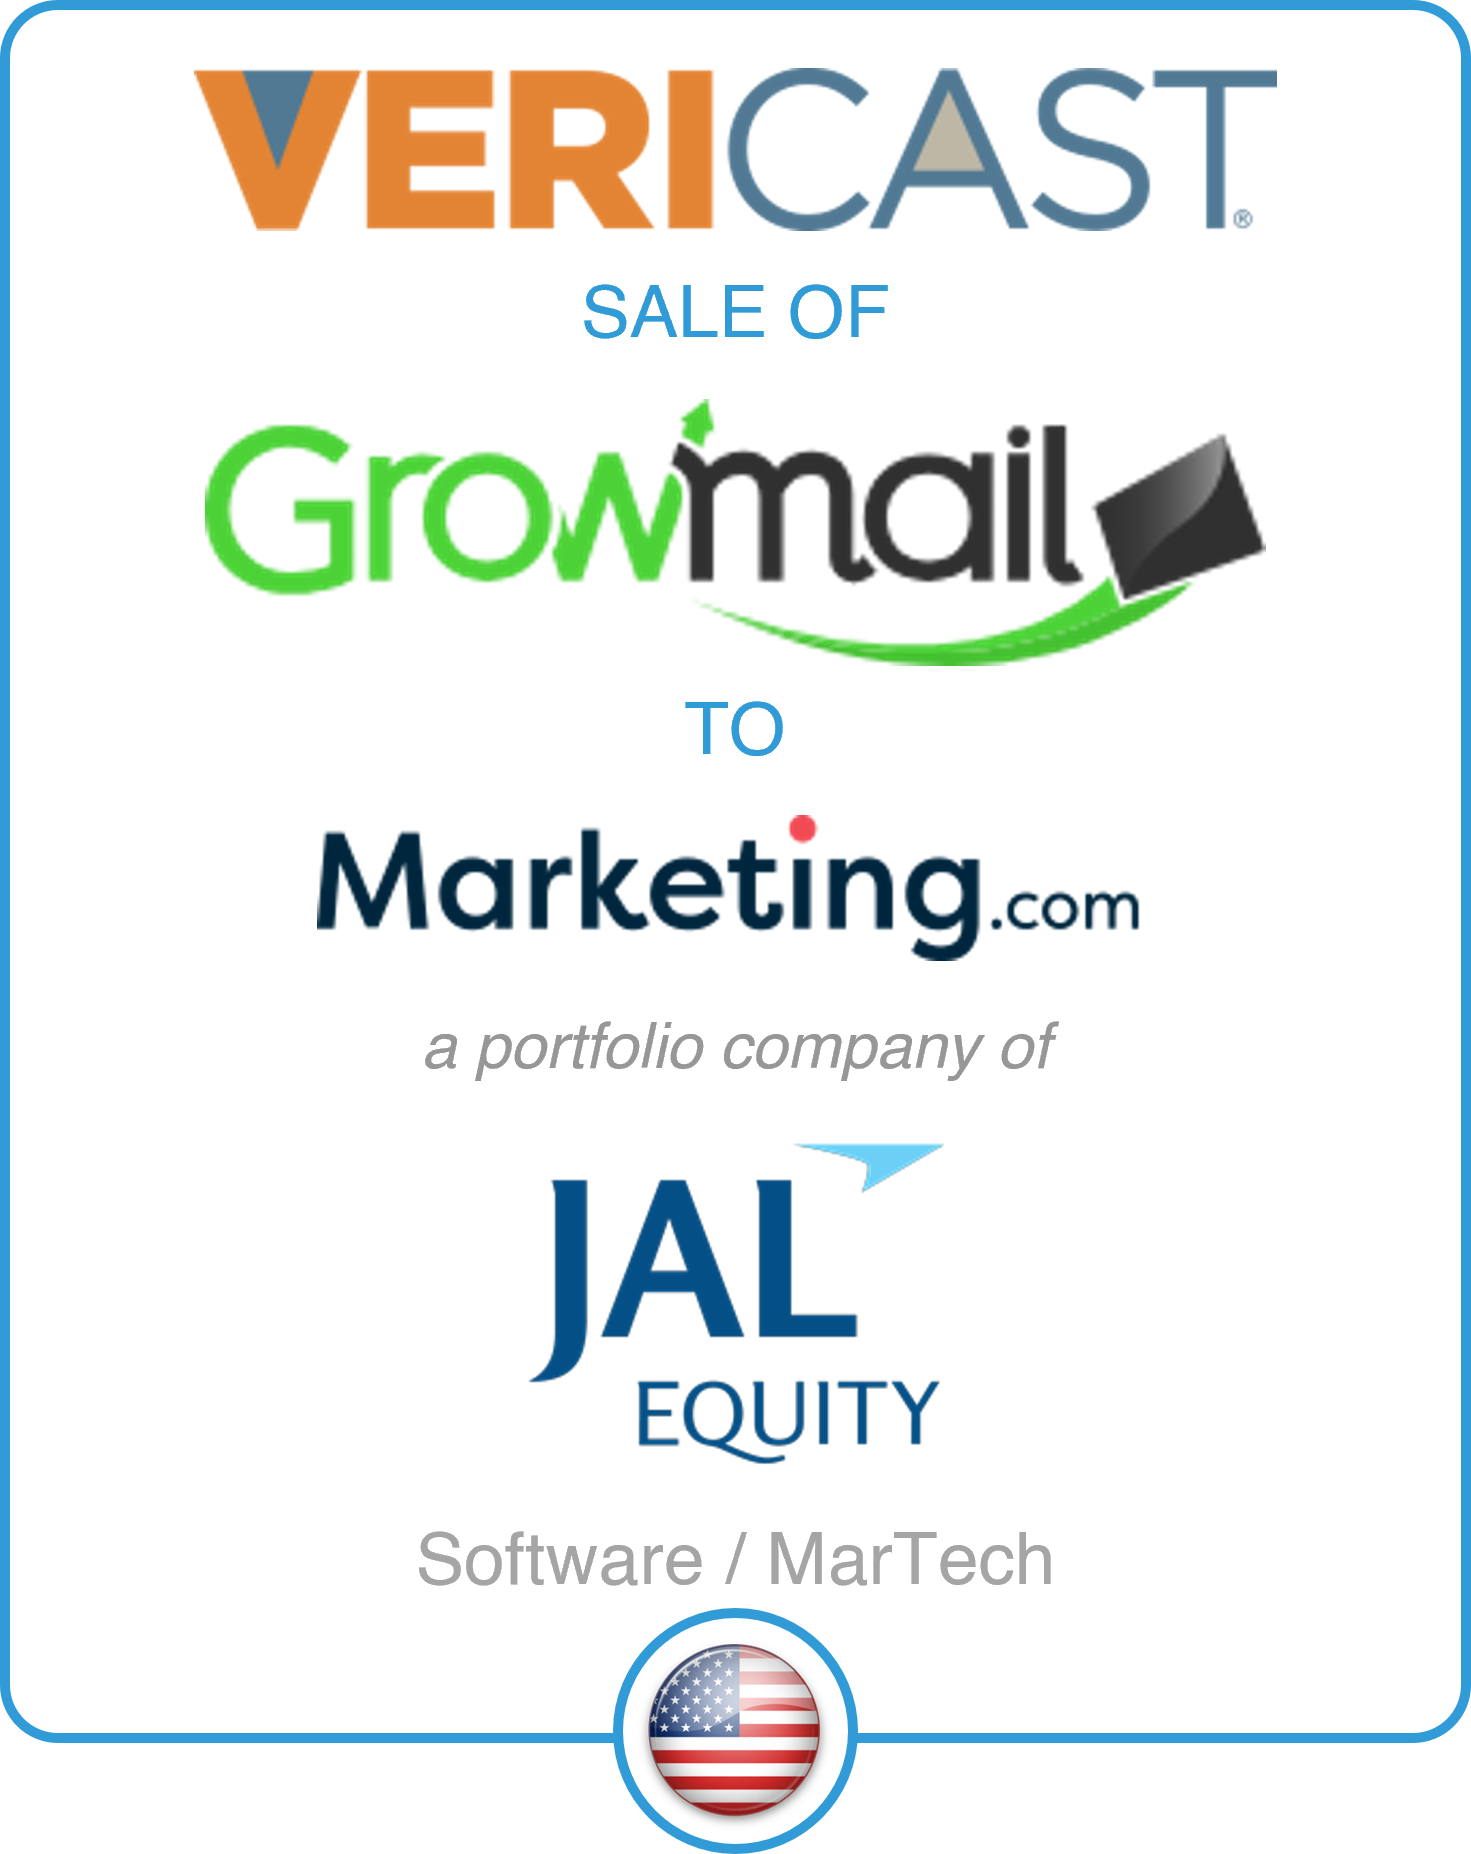 Drake Star Acts as Exclusive Financial Advisor to Vericast on its Sale of Growmail to Marketing.com a Portfolio Company of JAL Equity